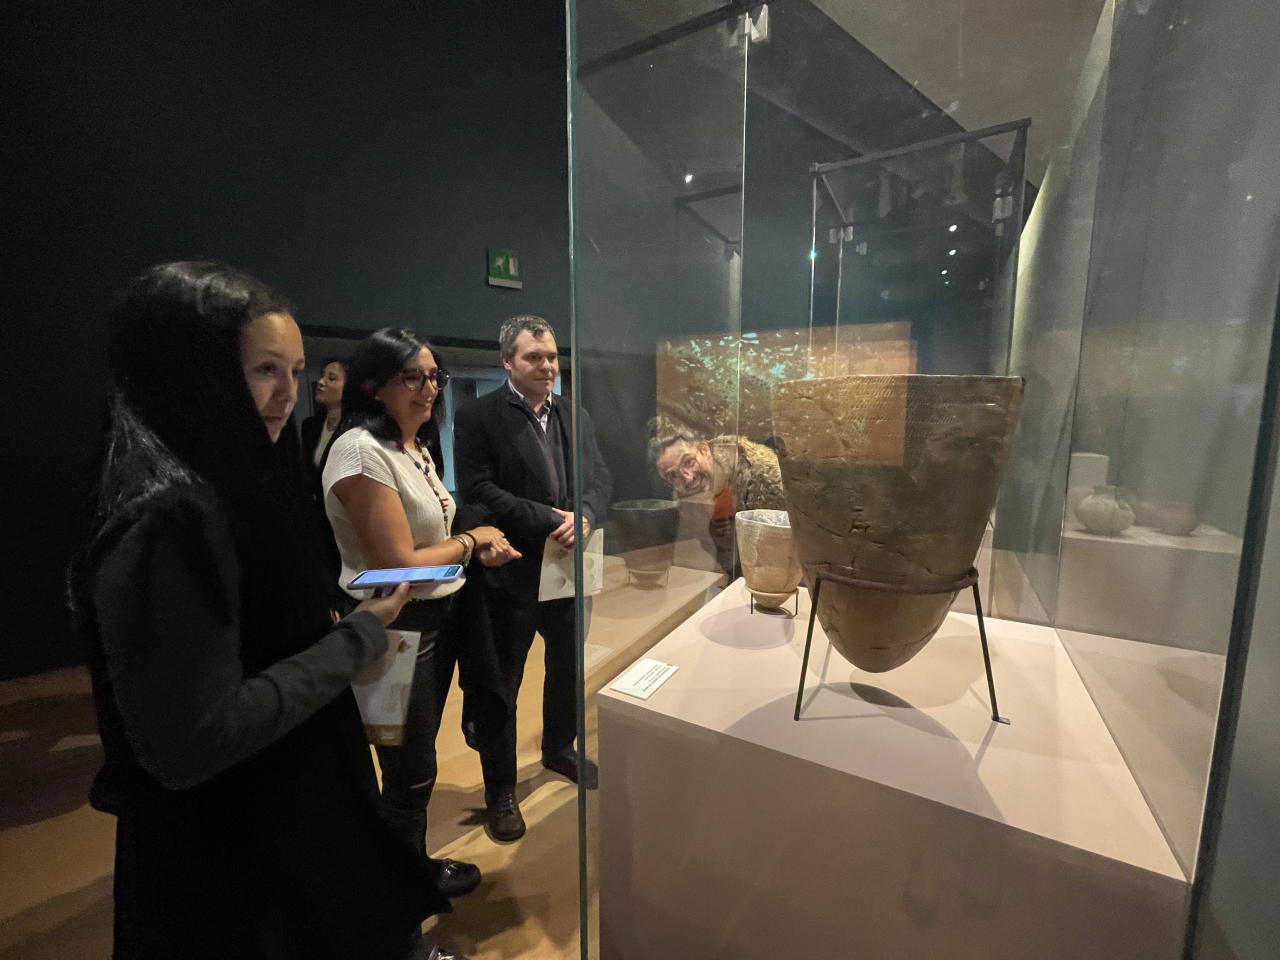 Visitors look at comb-pattern pottery from the Neolithic period at the Museum of Gold’s special exhibition on traditional Korean earthenware and ceramics in Bogota, Colombia, Friday. (NMK)